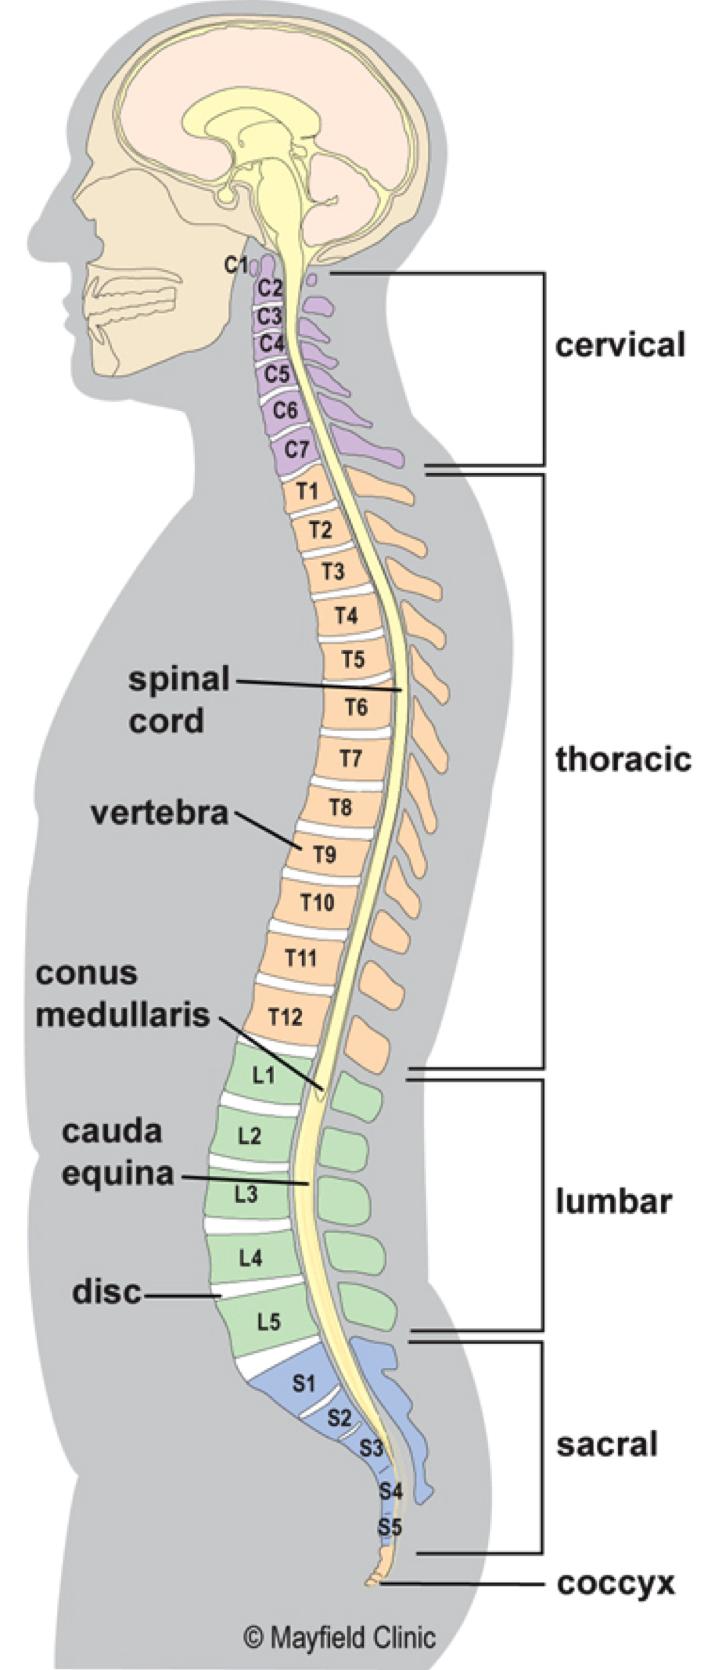 1 2 Anatomy of the Spine Overview The spine is made of 33 individual bony vertebrae stacked one on top of the other.